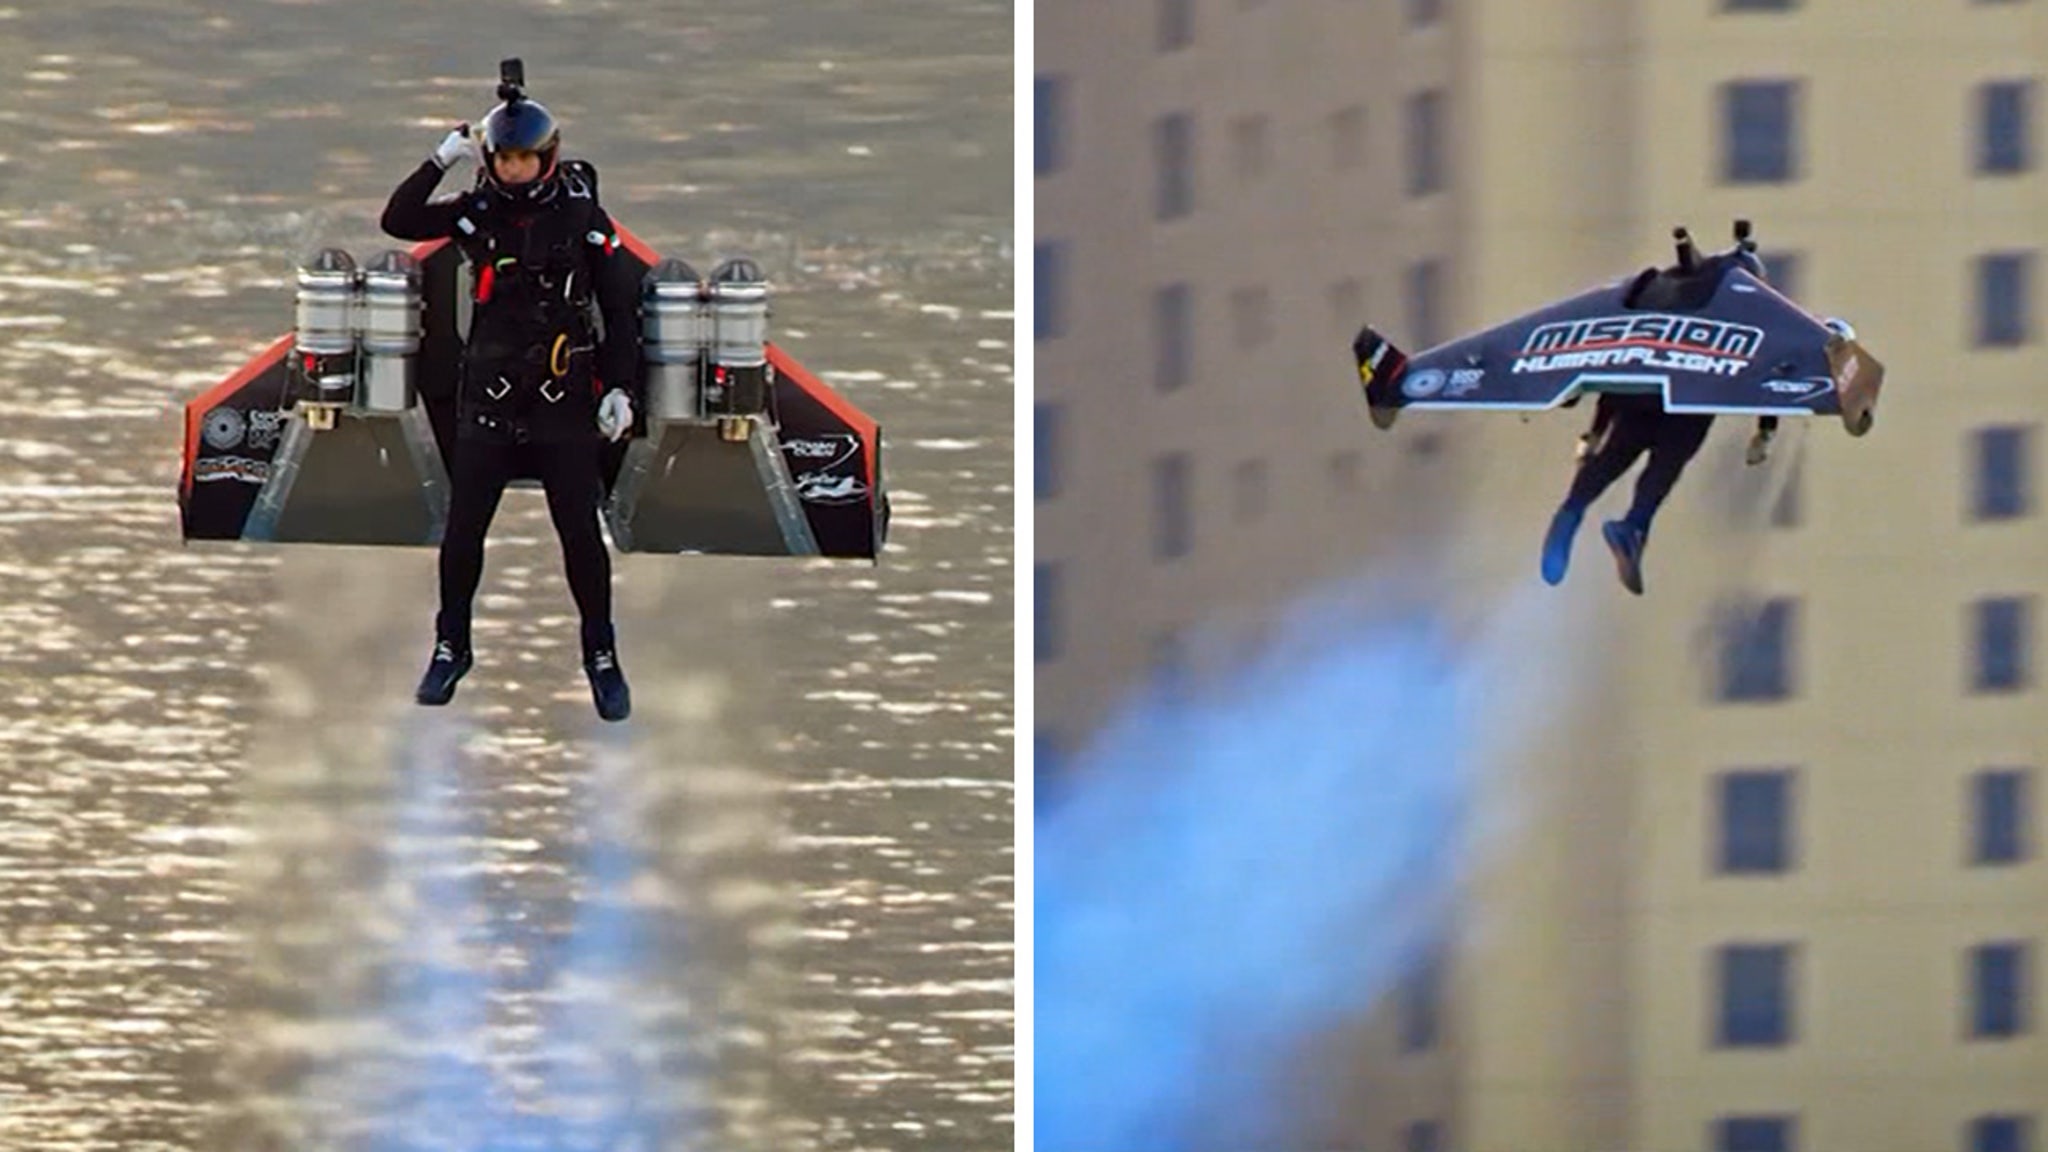 Here's what it's like to fly over Dubai with a jetpack, jetpacks